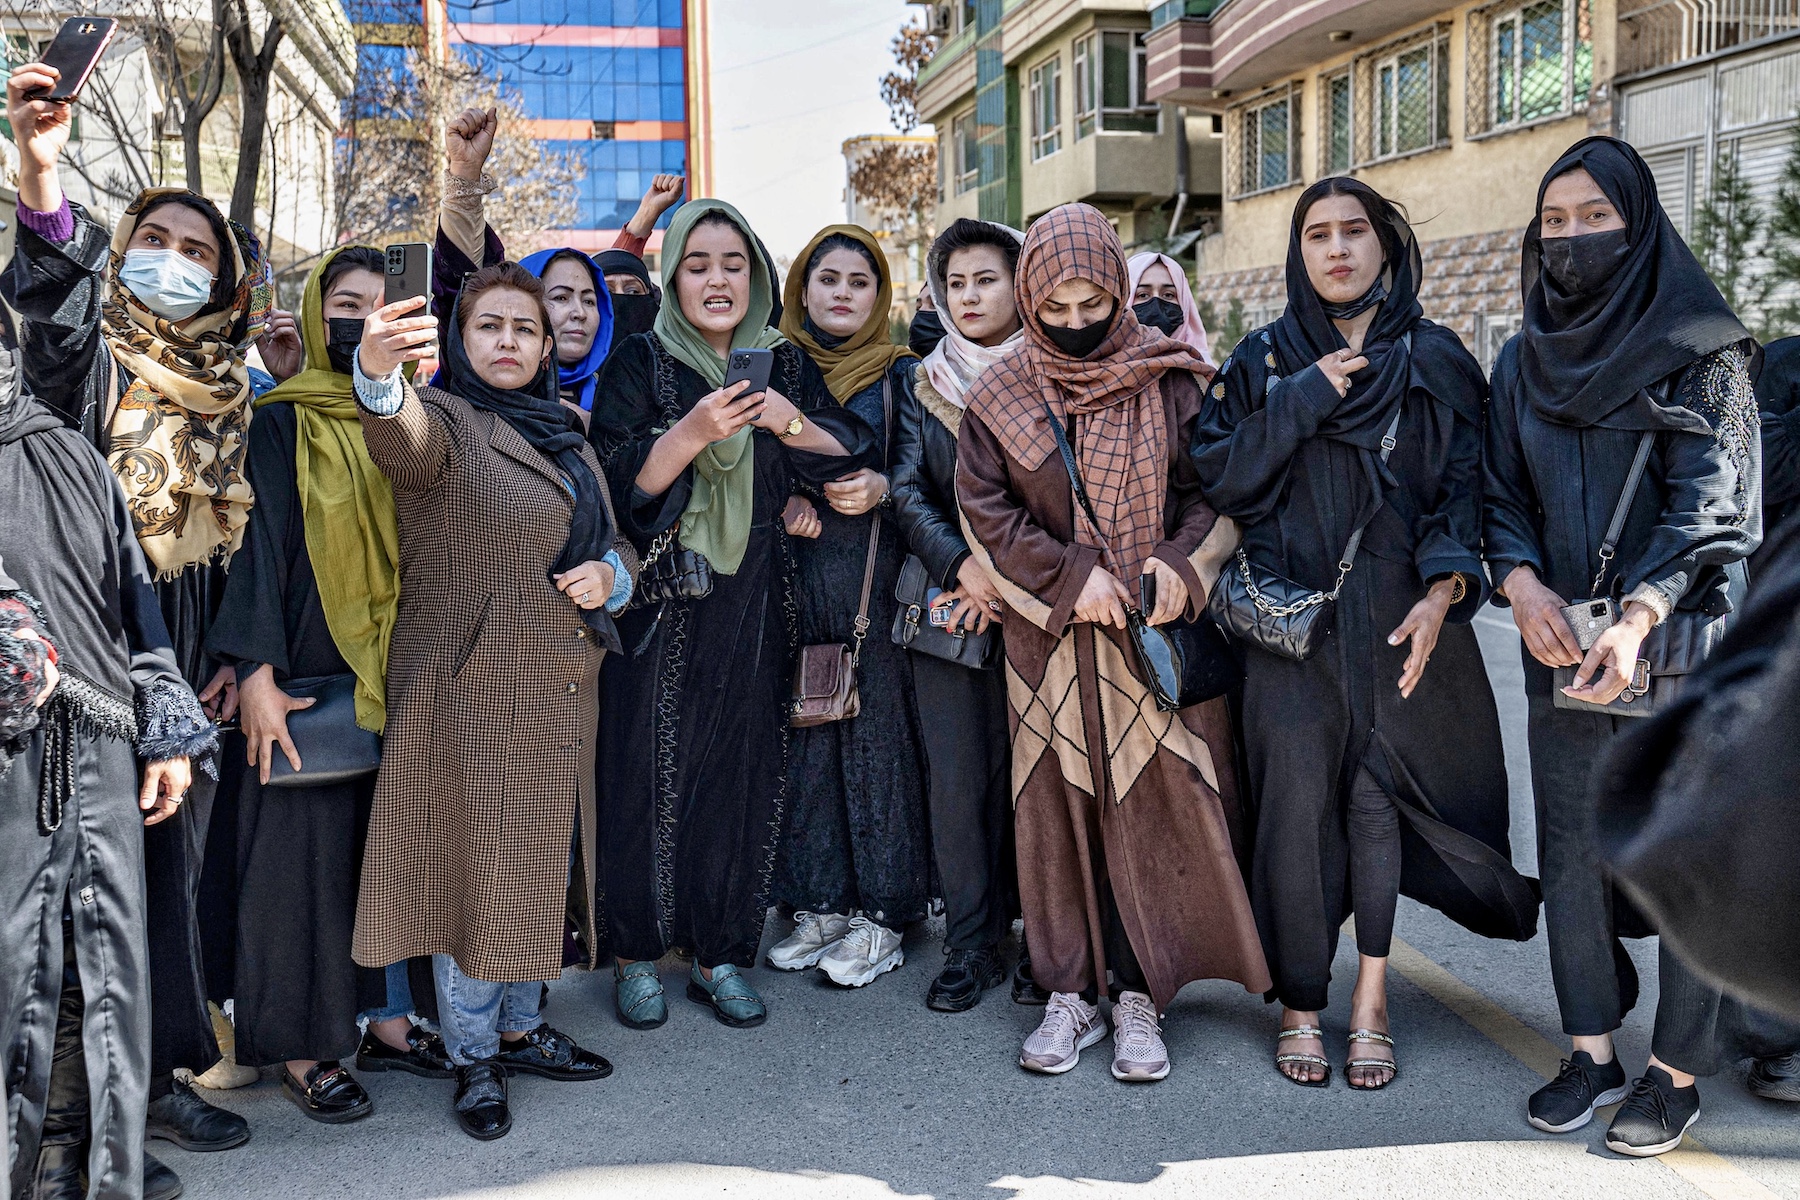 Women demonstrate on International Women's Day in Kabul, the capital of Afghanistan, while wearing headresses. Some of them seem to be appear to be snapping pictures by holding their phones up.